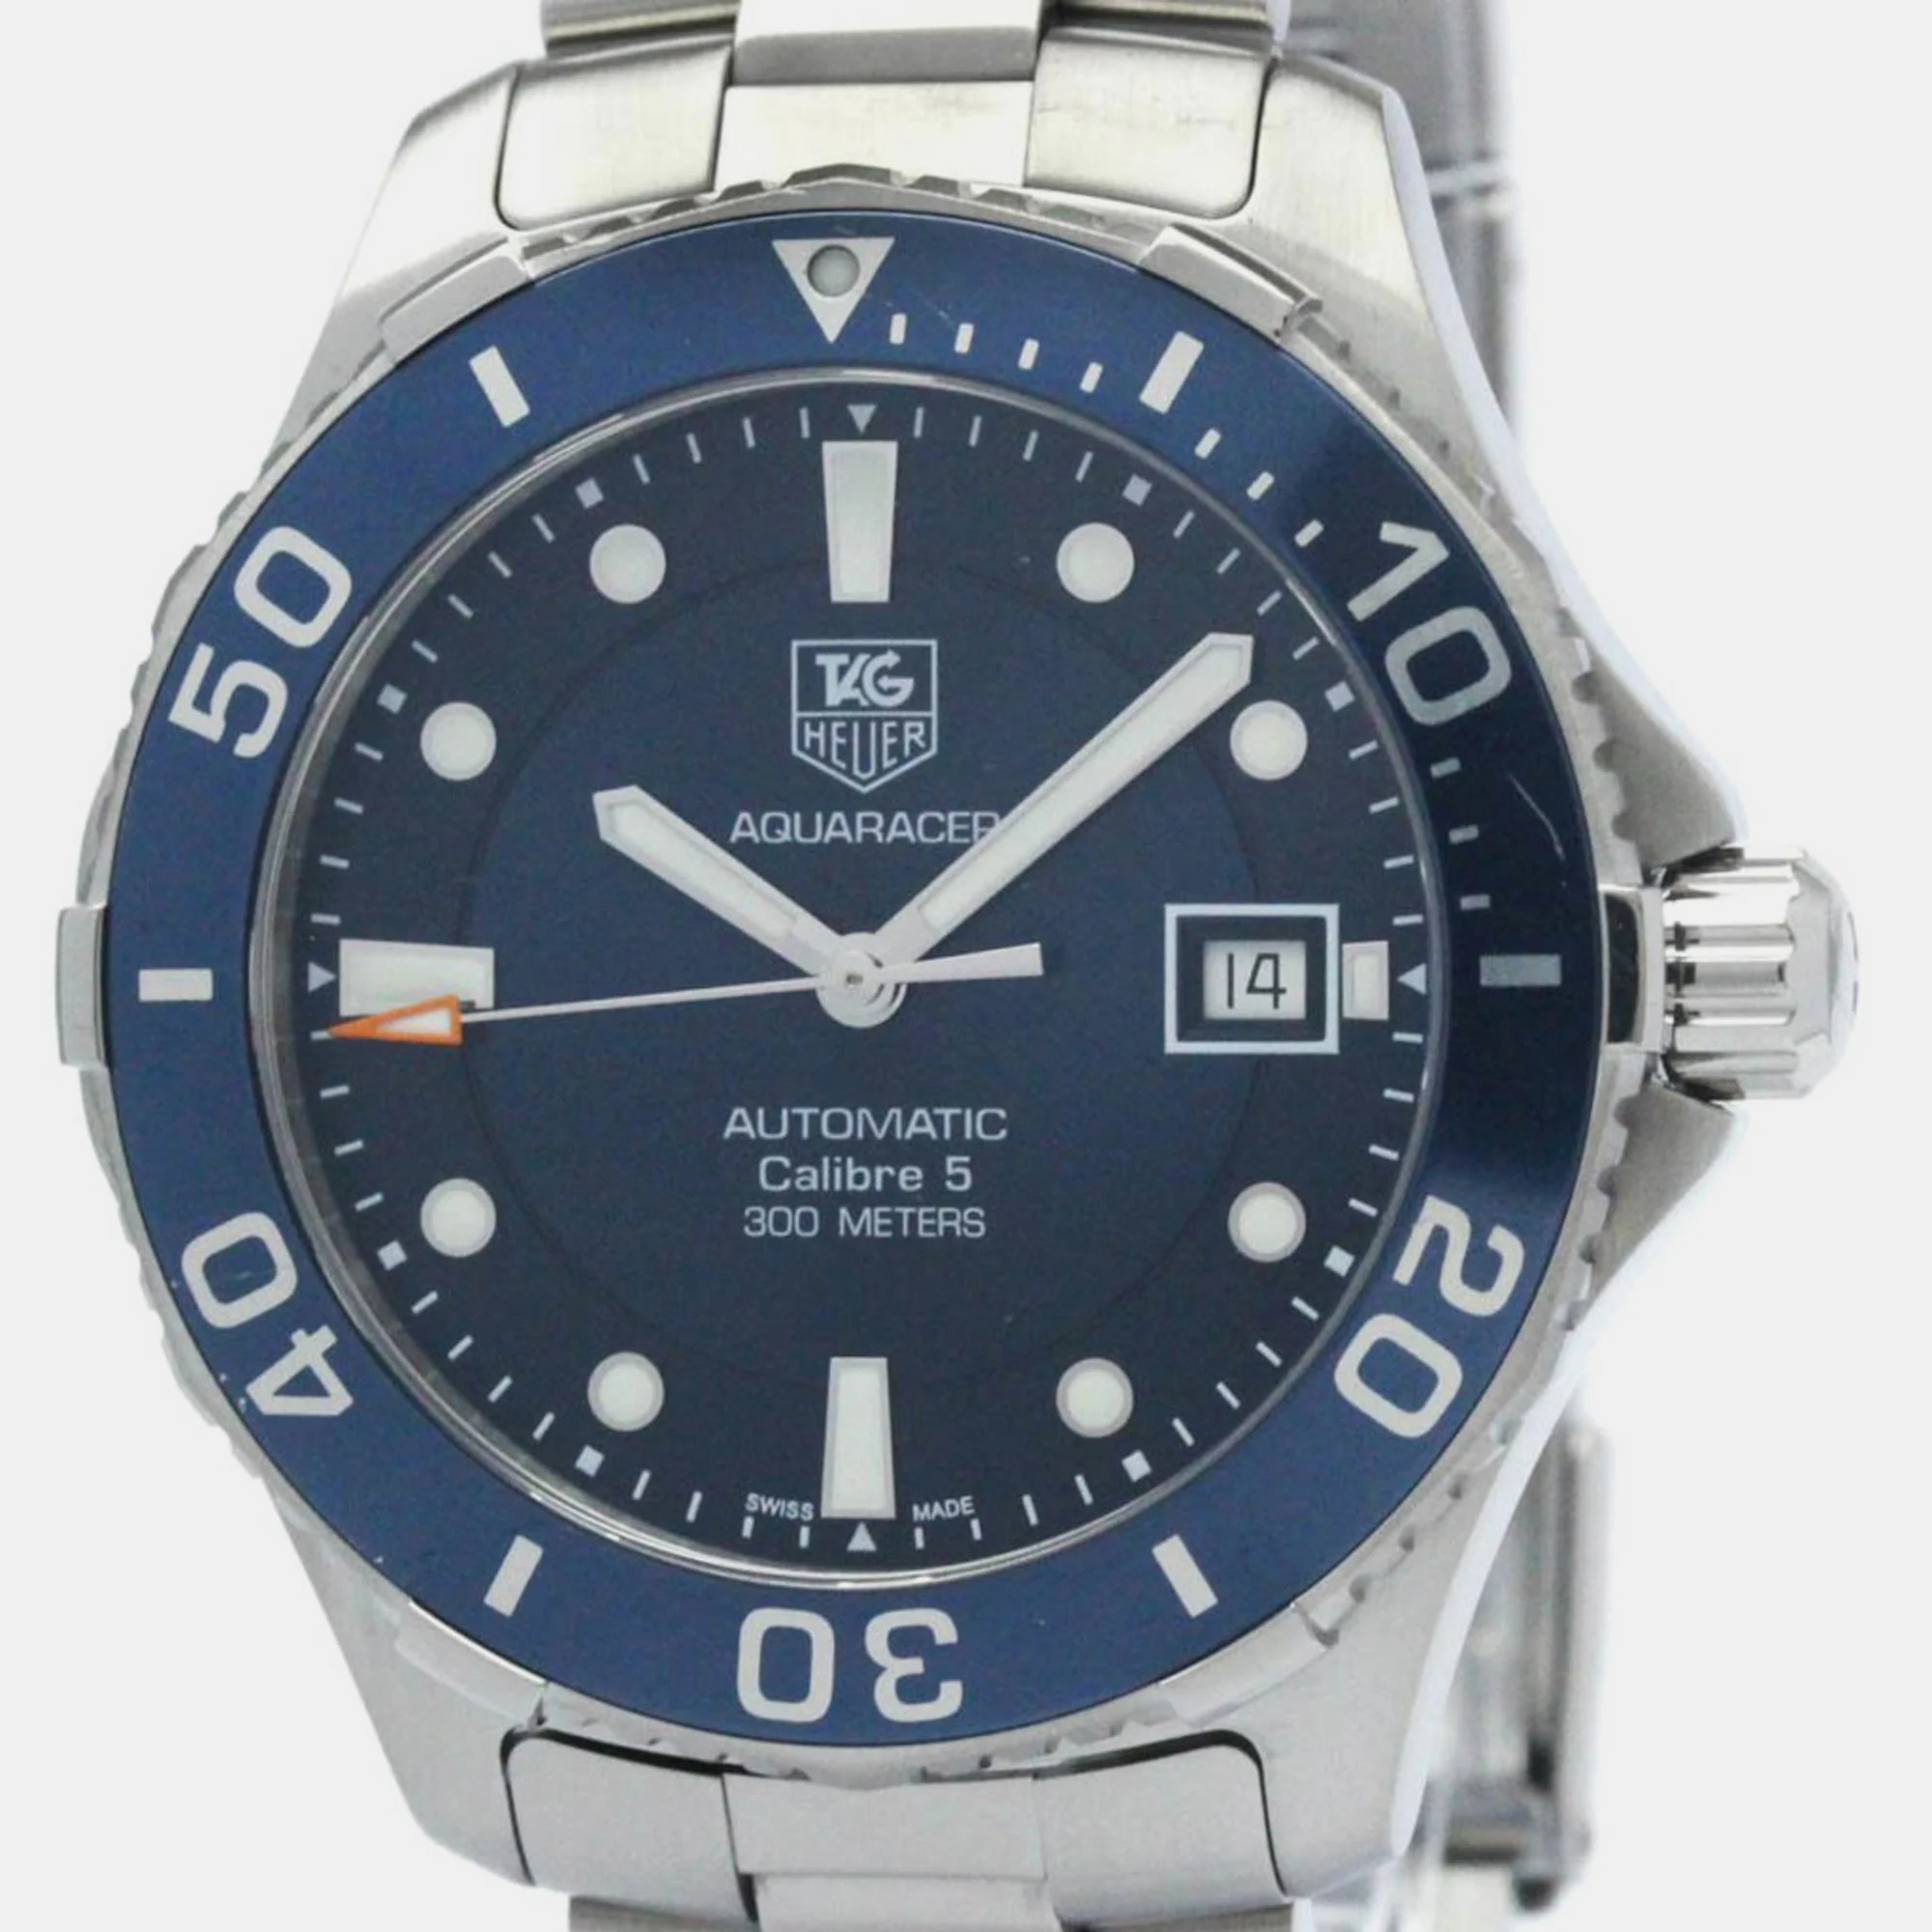 Tag heuer blue stainless steel aquaracer wan2111 automatic men's wristwatch 42 mm